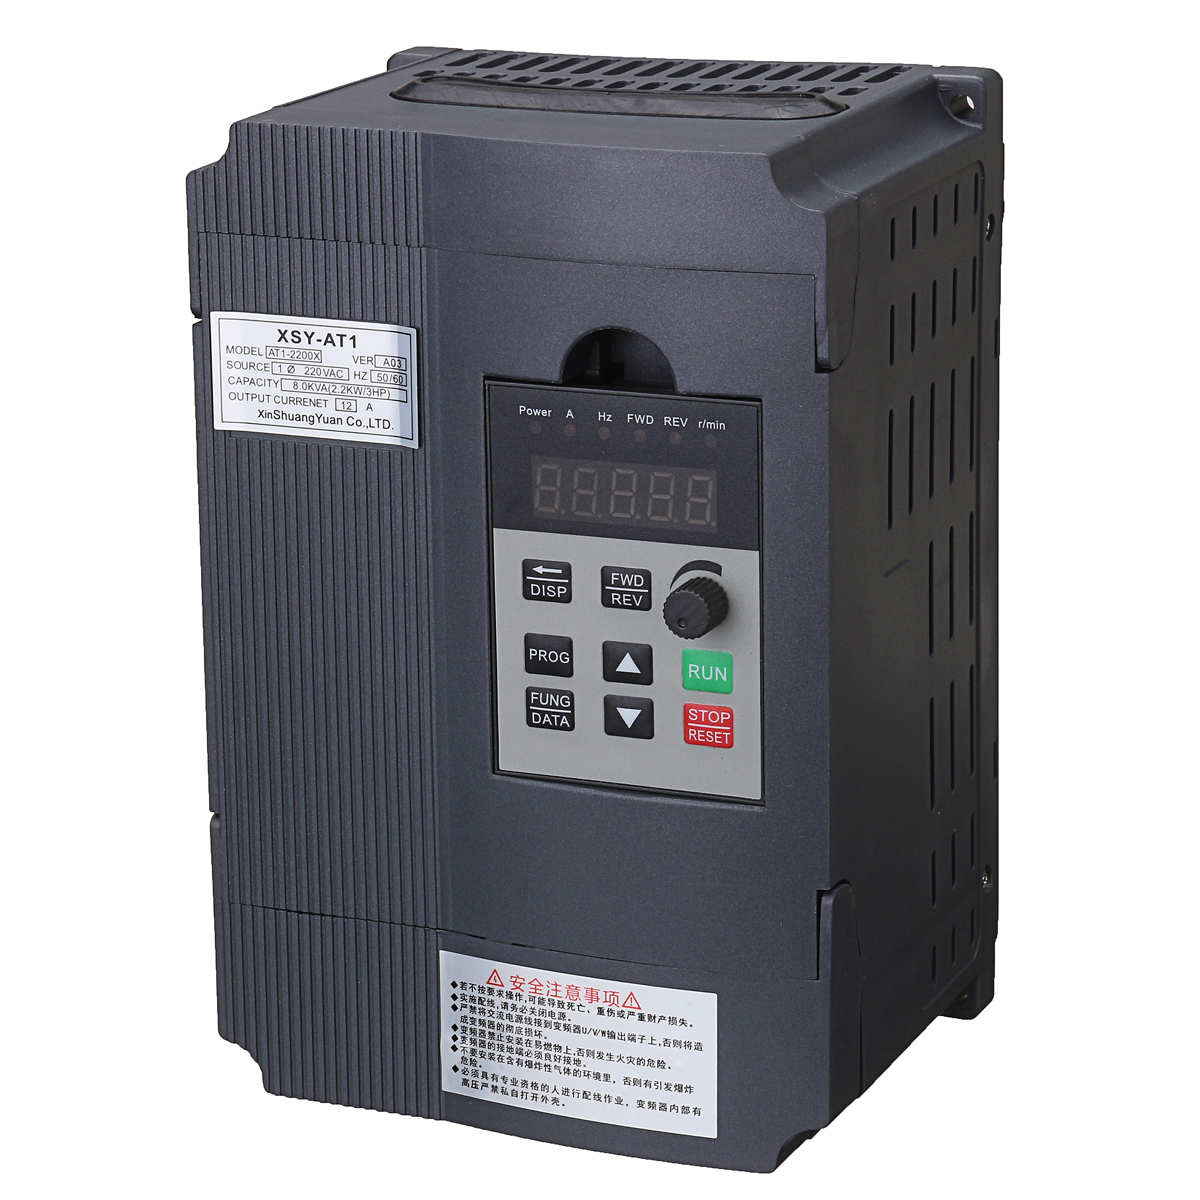 22KW-220V-12A-Single-Phase-Input-3-Phase-Output-PWM-Frequency-Converter-Drive-Inverter-VF-Vector-Con-1288332-5